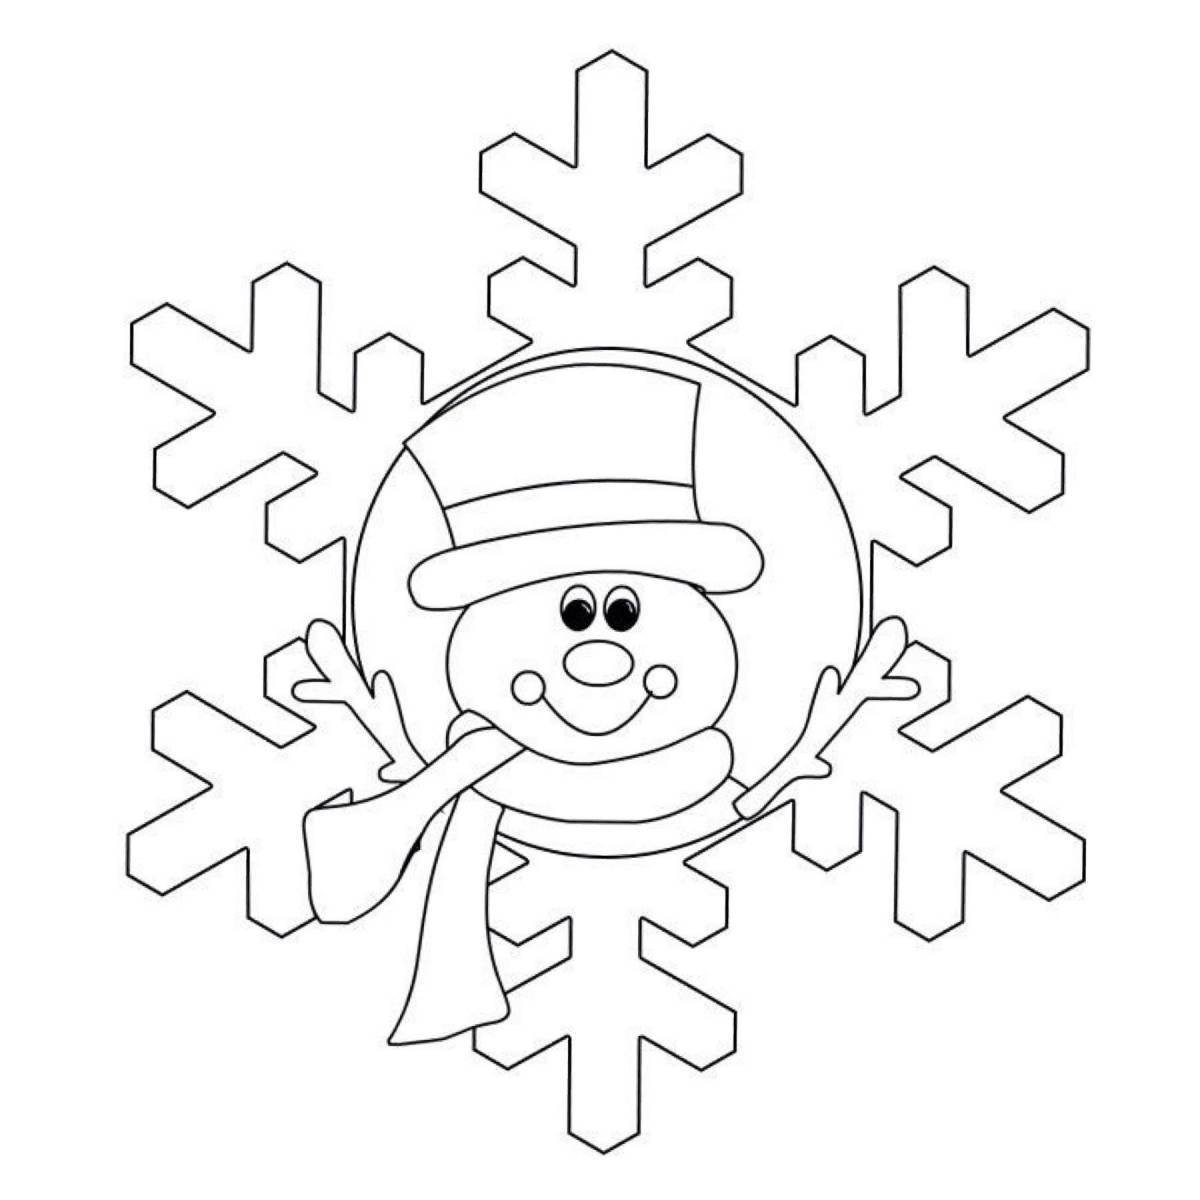 Joyful snowflake coloring book for children 5-6 years old